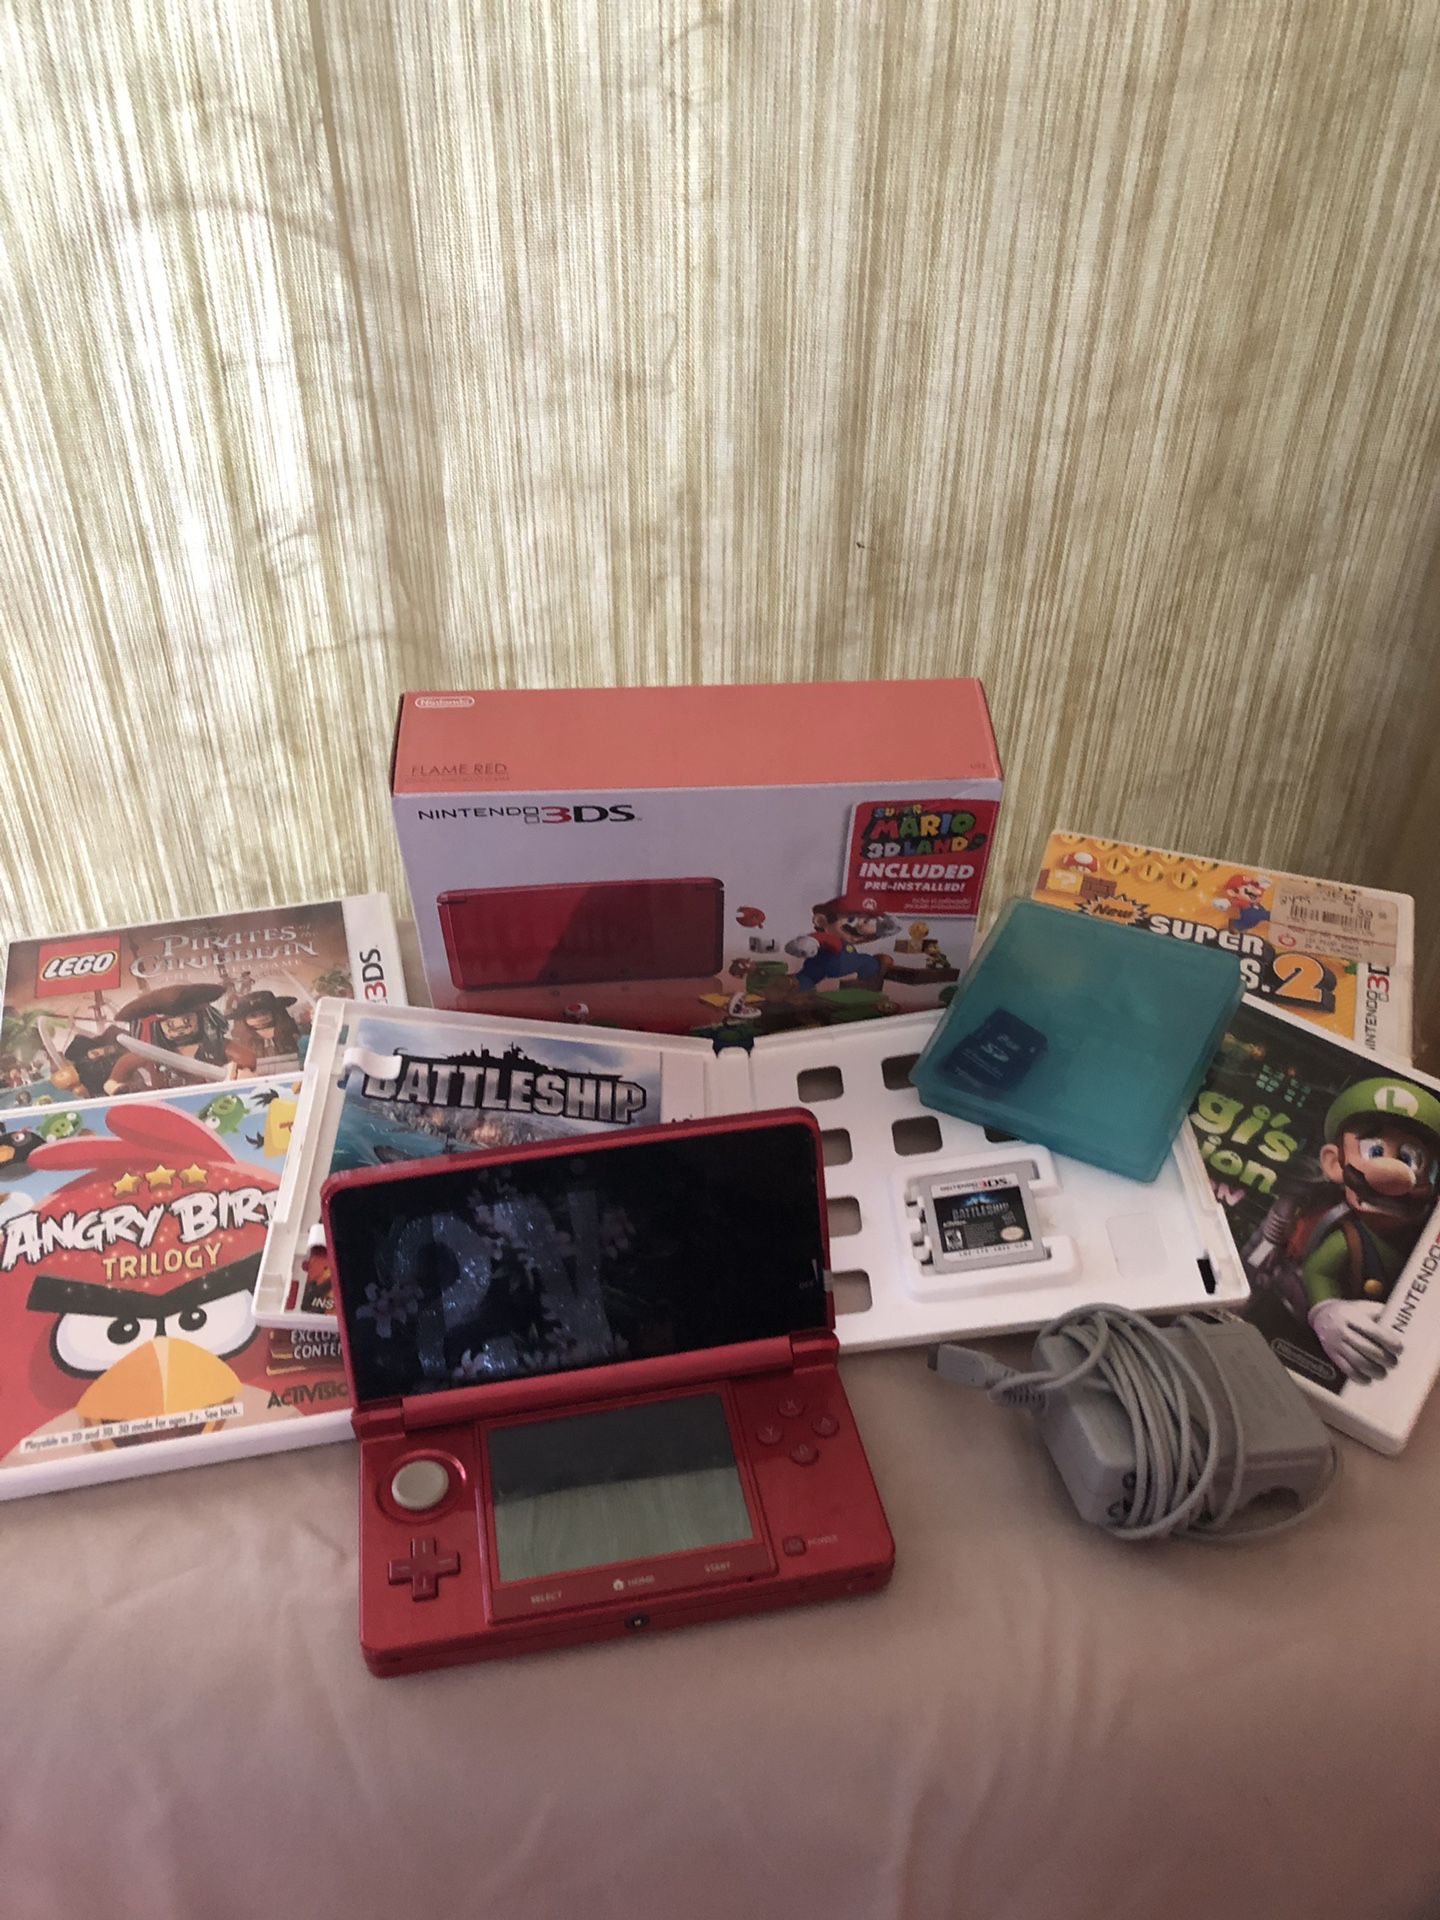 3DS with original box and 5 games in cases